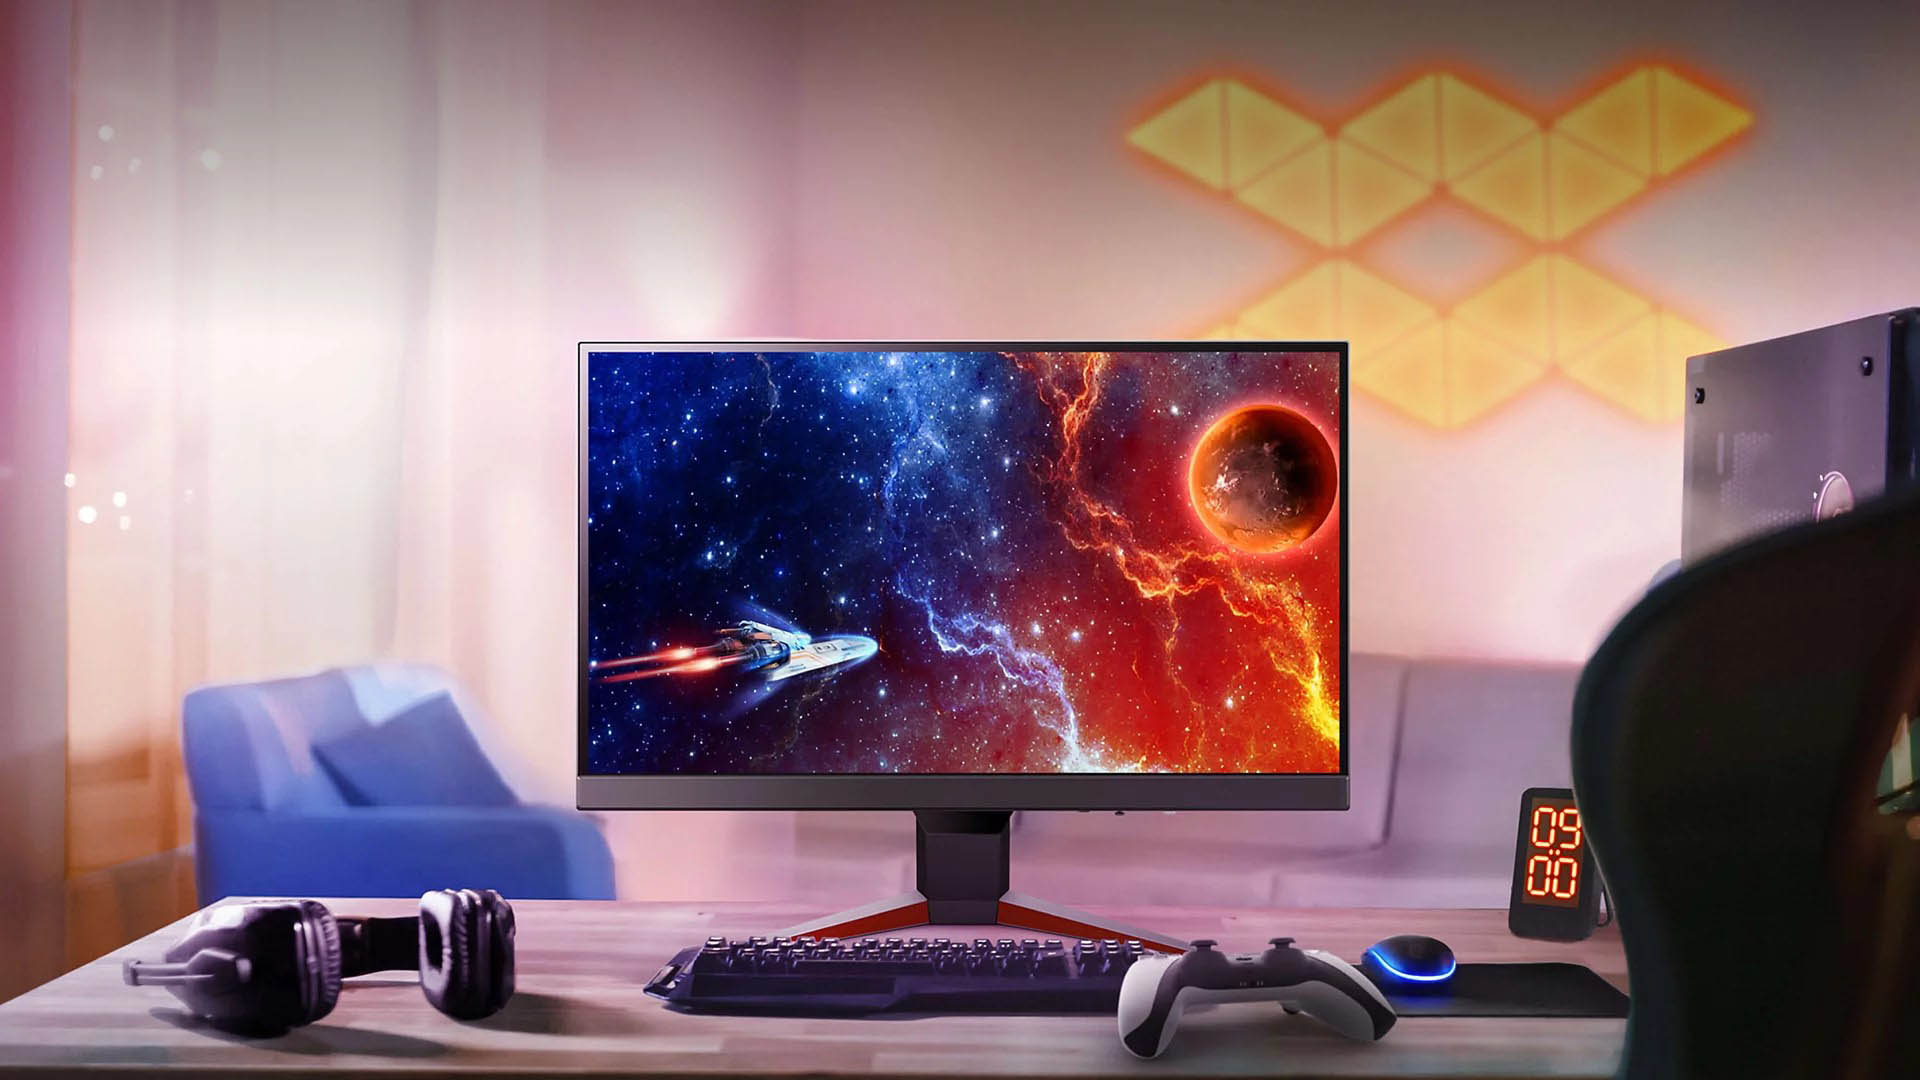 , Tough Year Ahead For Gaming PC, Monitor Sector: IDC